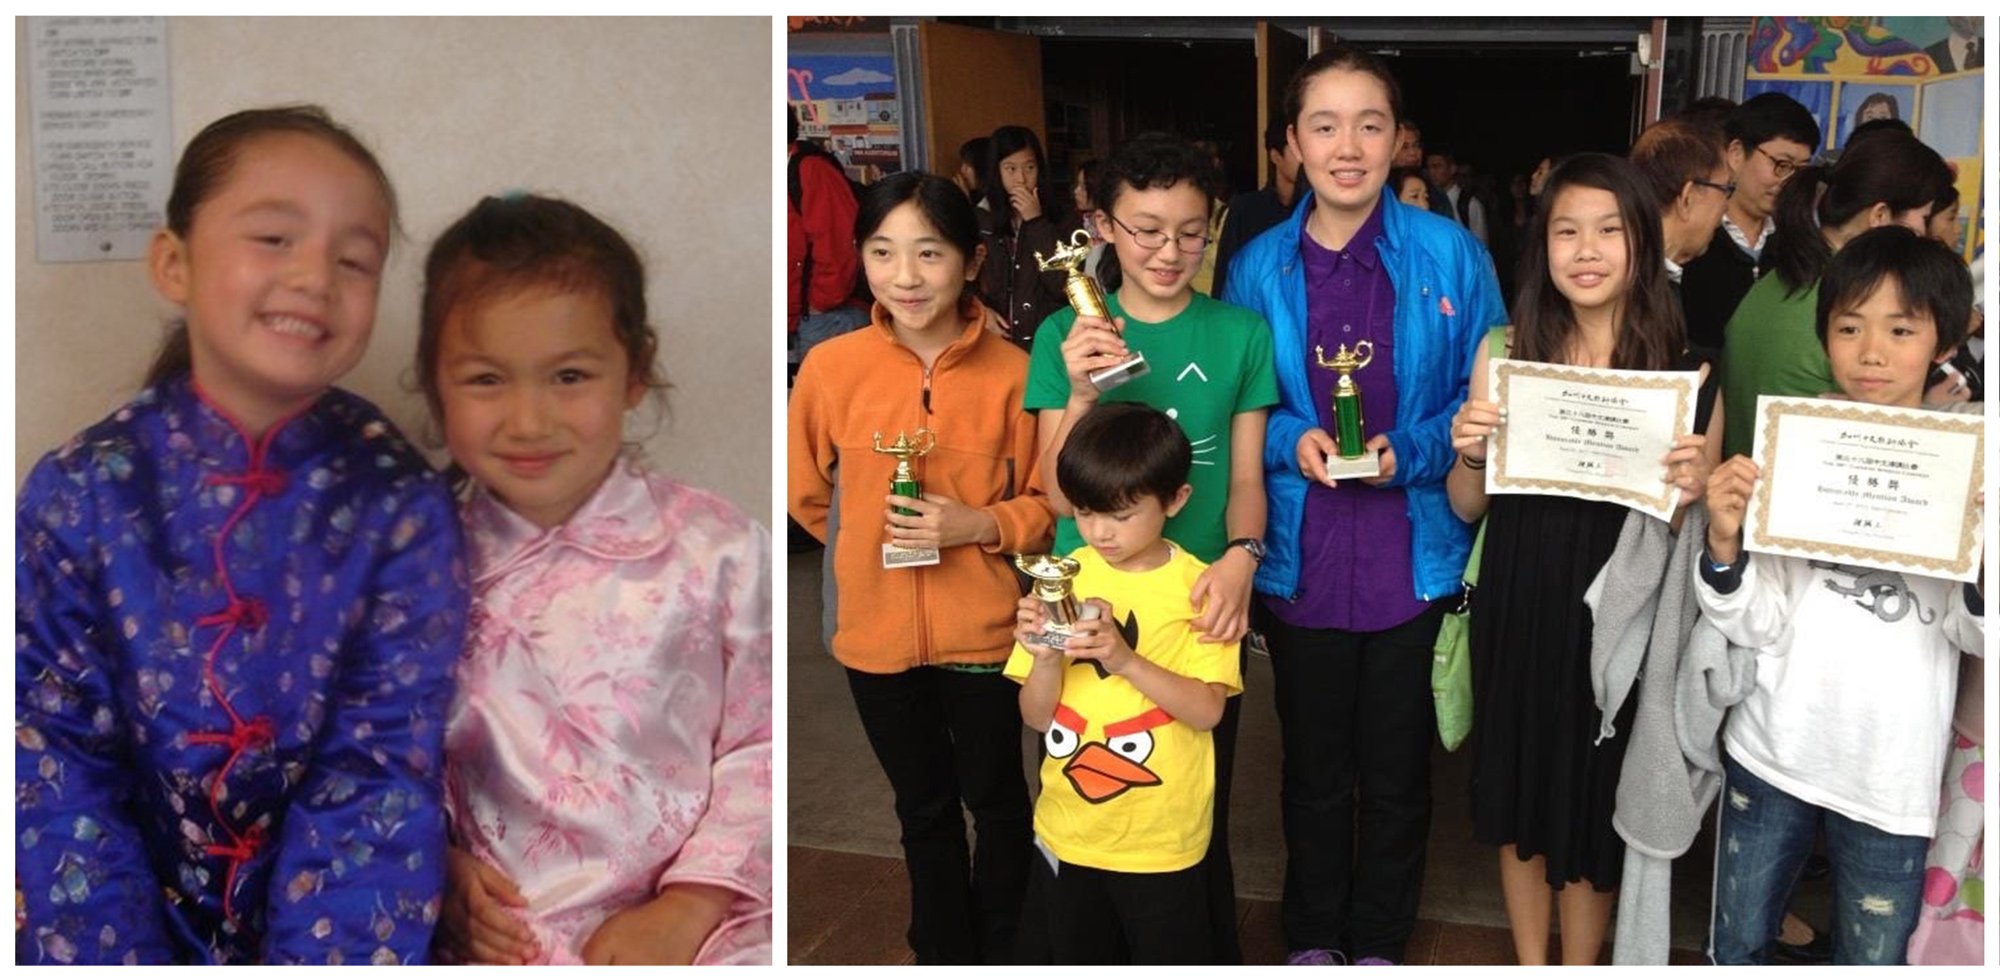 Early photos of Ashley at INTL in the Chinese Language Immersion Program including winning an award